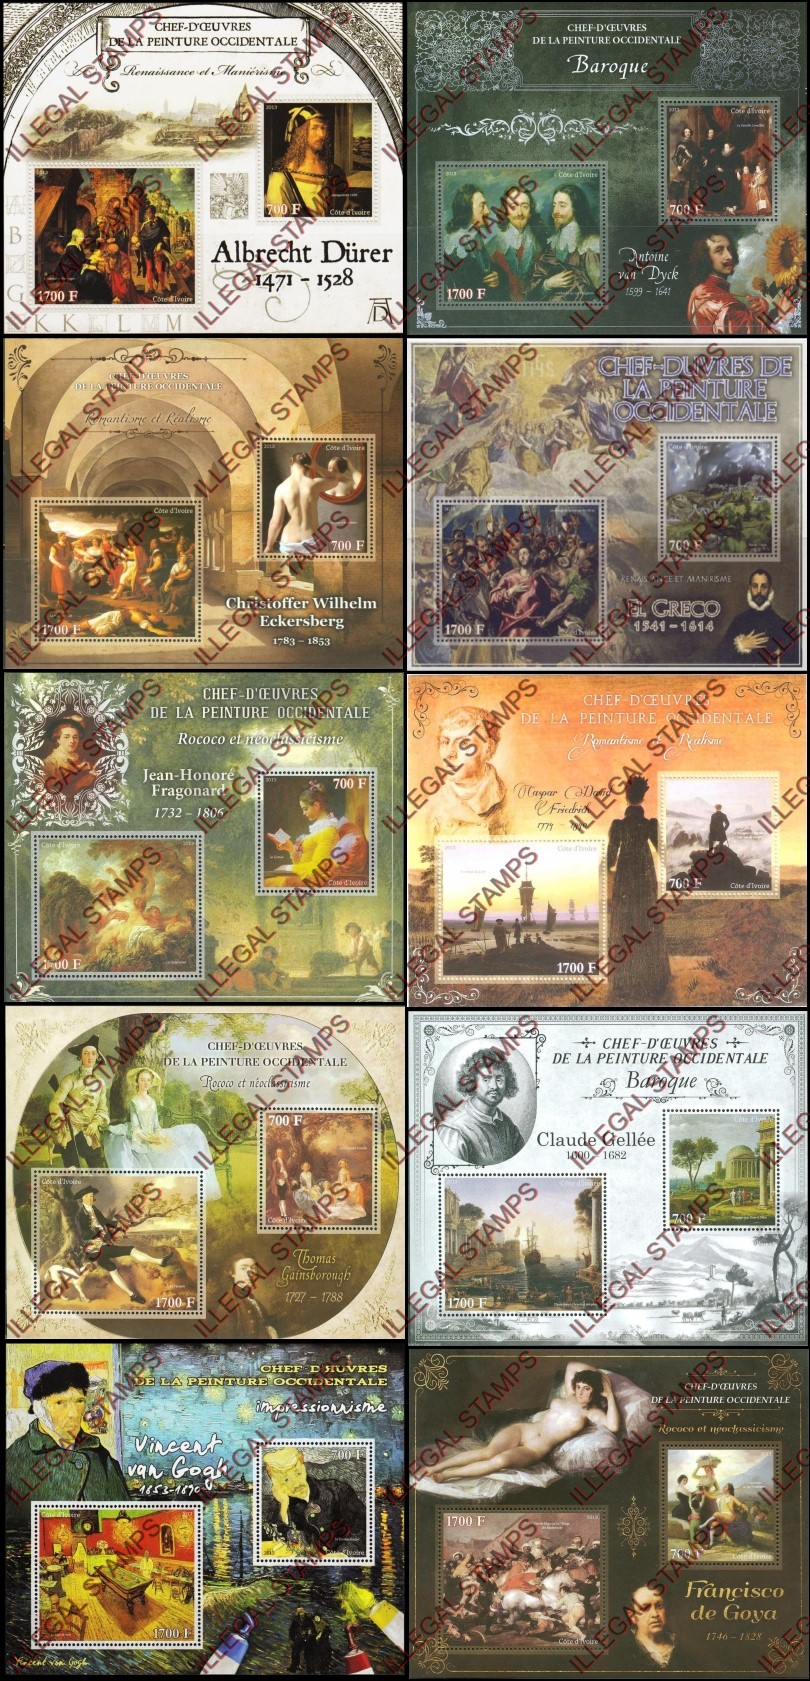 Ivory Coast 2013 Art Impressionism Paintings Illegal Stamp Souvenir Sheets of 2 (part 3)